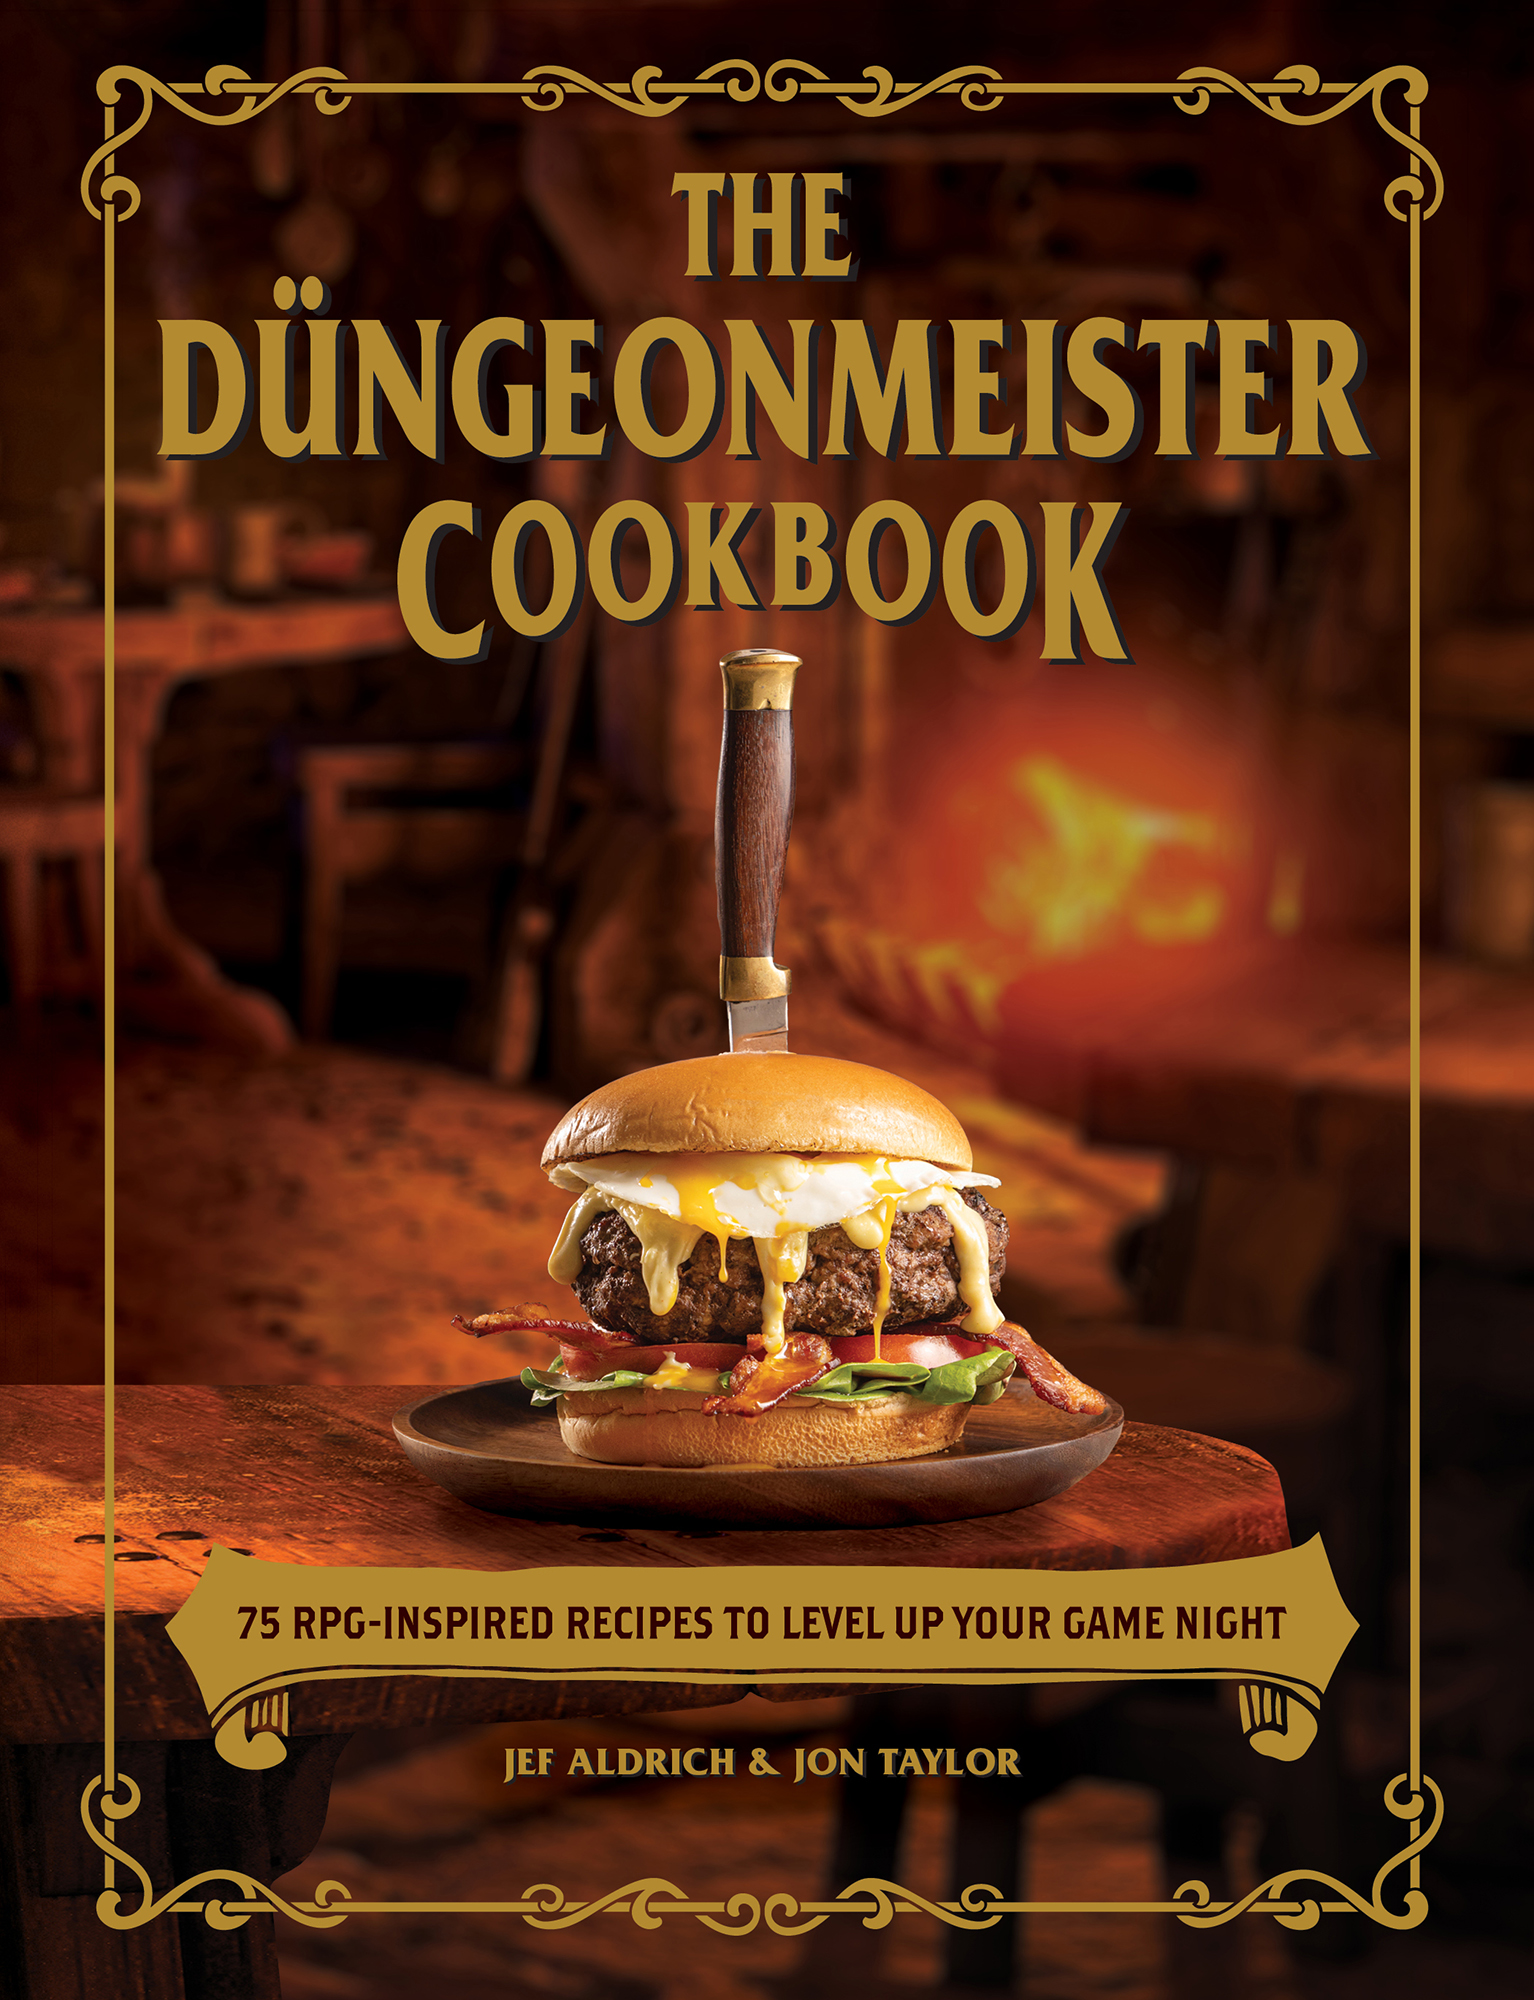 The Dngeonmeister Cookbook 75 RPG-Inspired Recipes to Level Up Your Game Night - image 1